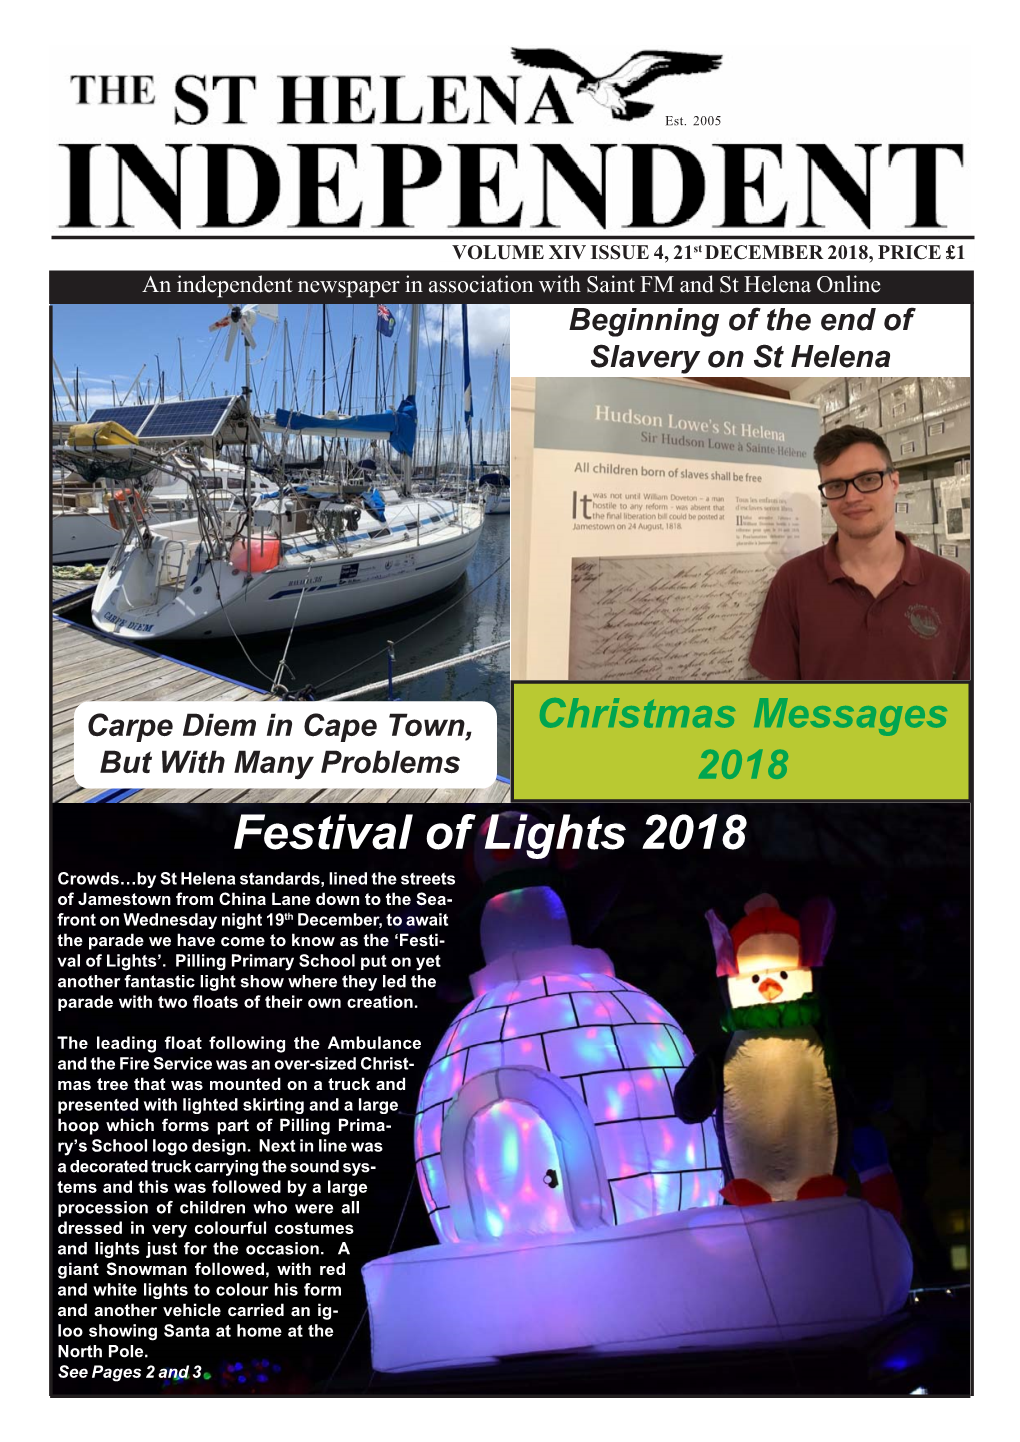 St Helena Independent Volume XIV, Issue 4, Friday 21St December 2018 2 ENTERTAINMENT NEWSFEED in BRIEF……